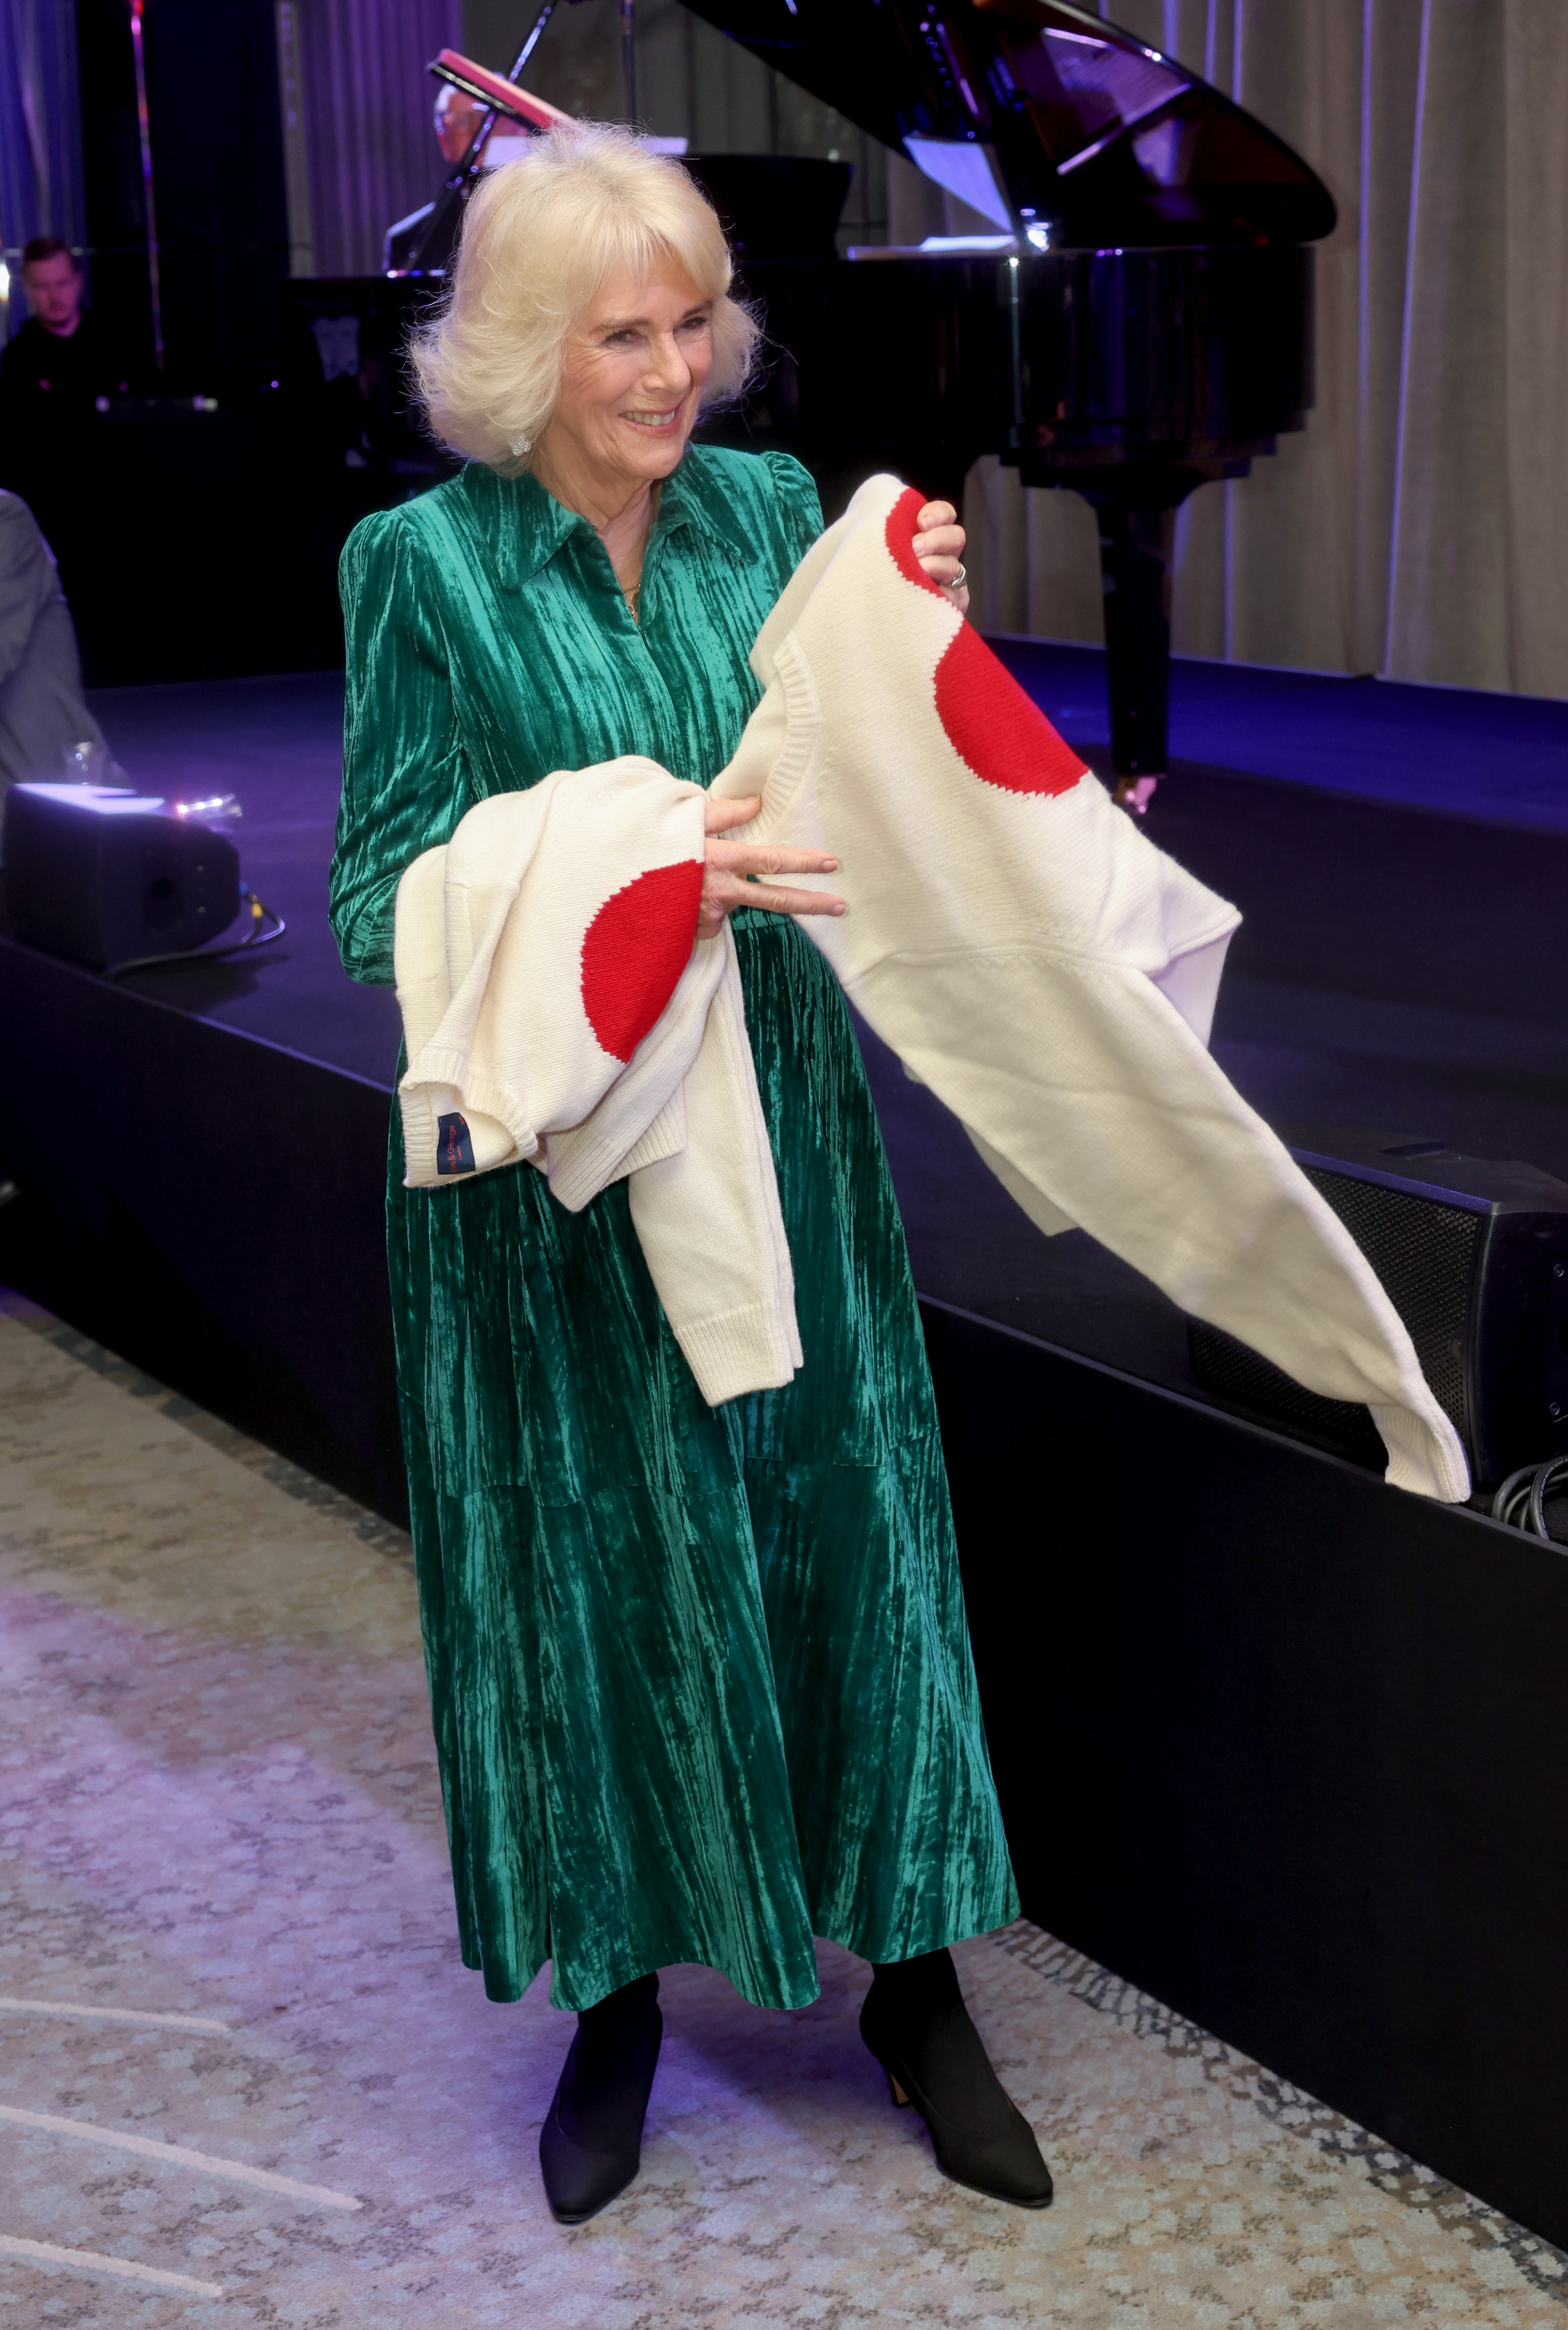 Queen Camilla receives sweaters during the "Celebration Of Shakespeare" event at Grosvenor House in London on February 14, 2024. | Source: Getty Images